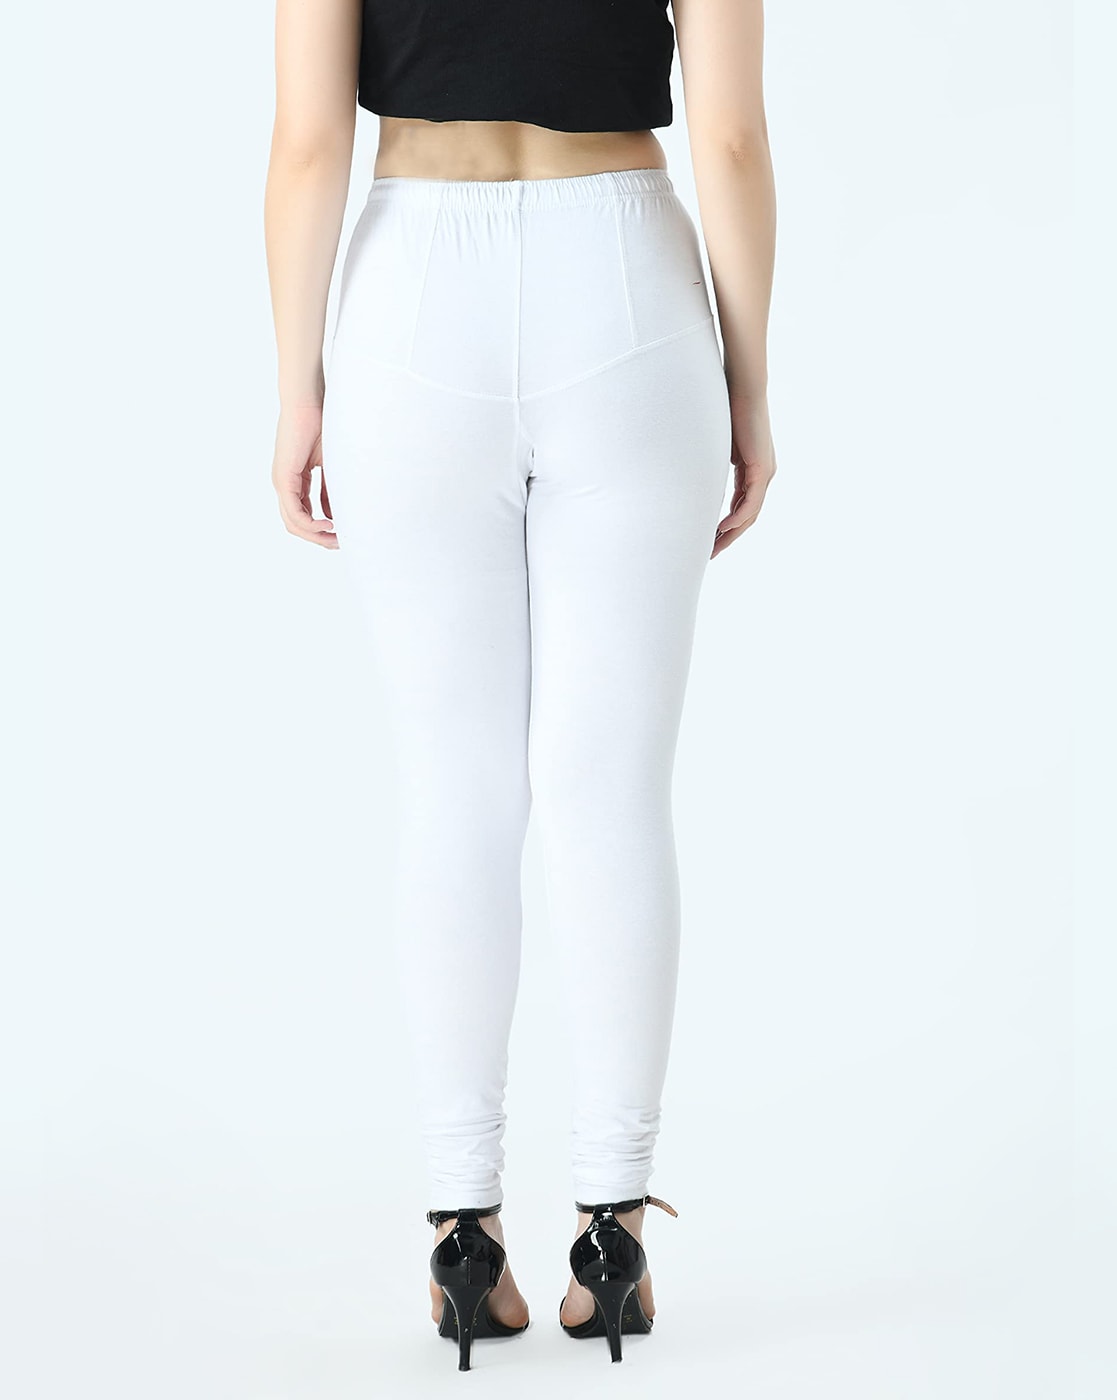 High Waist Women Cream White Solid Skinny Fit Ankle-Length side button  leggings, Party Wear at Rs 190 in Kolkata